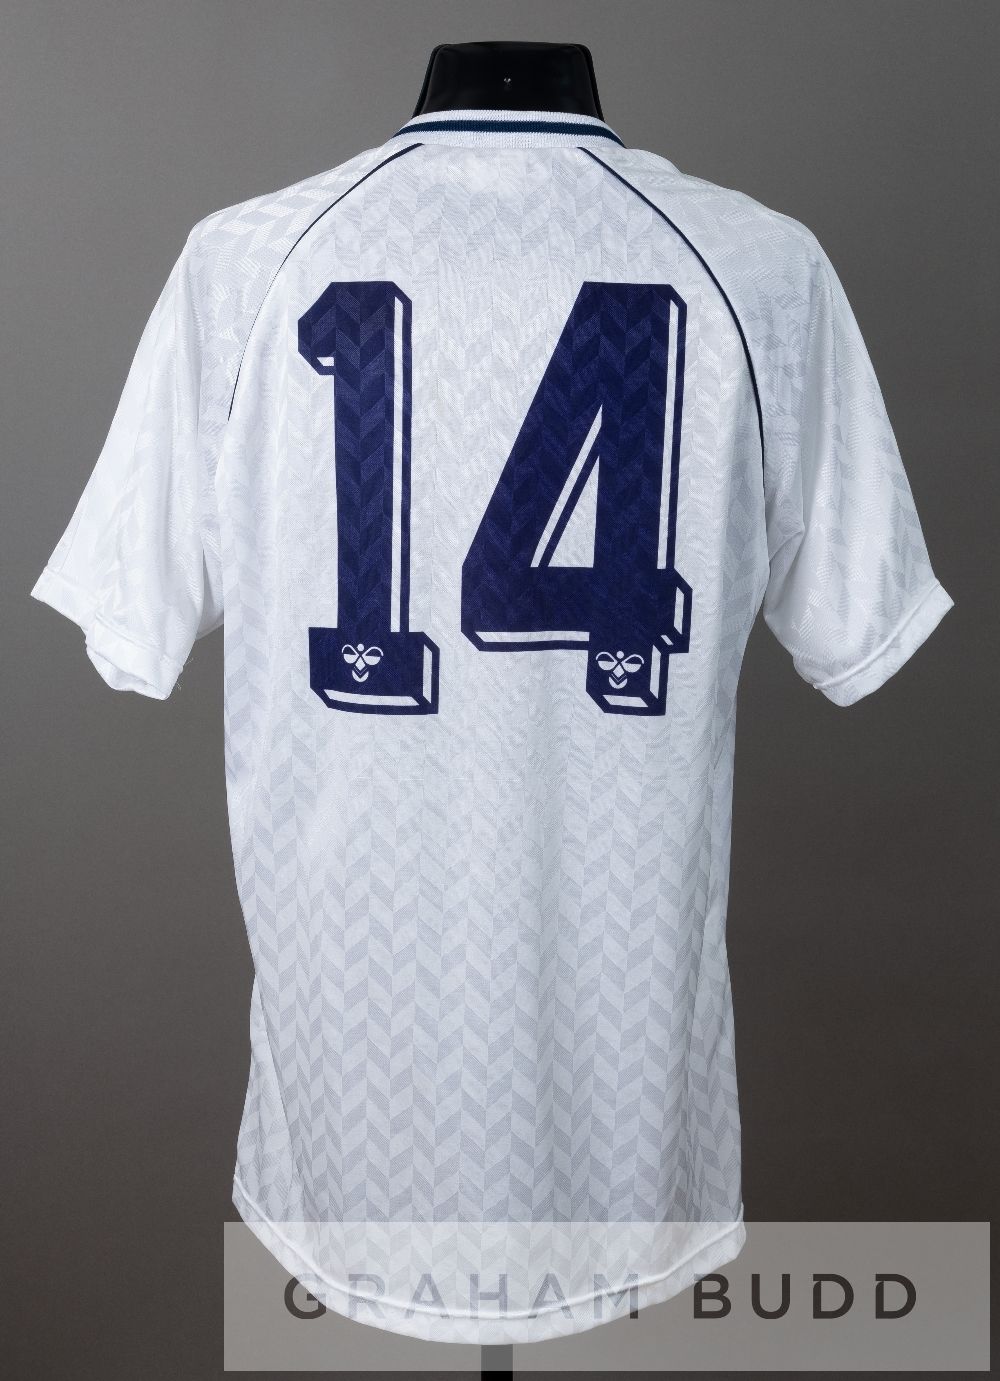 White Tottenham Hotspur no.14 substitute's jersey, circa 1988, by Hummel, short-sleeved with - Image 2 of 2